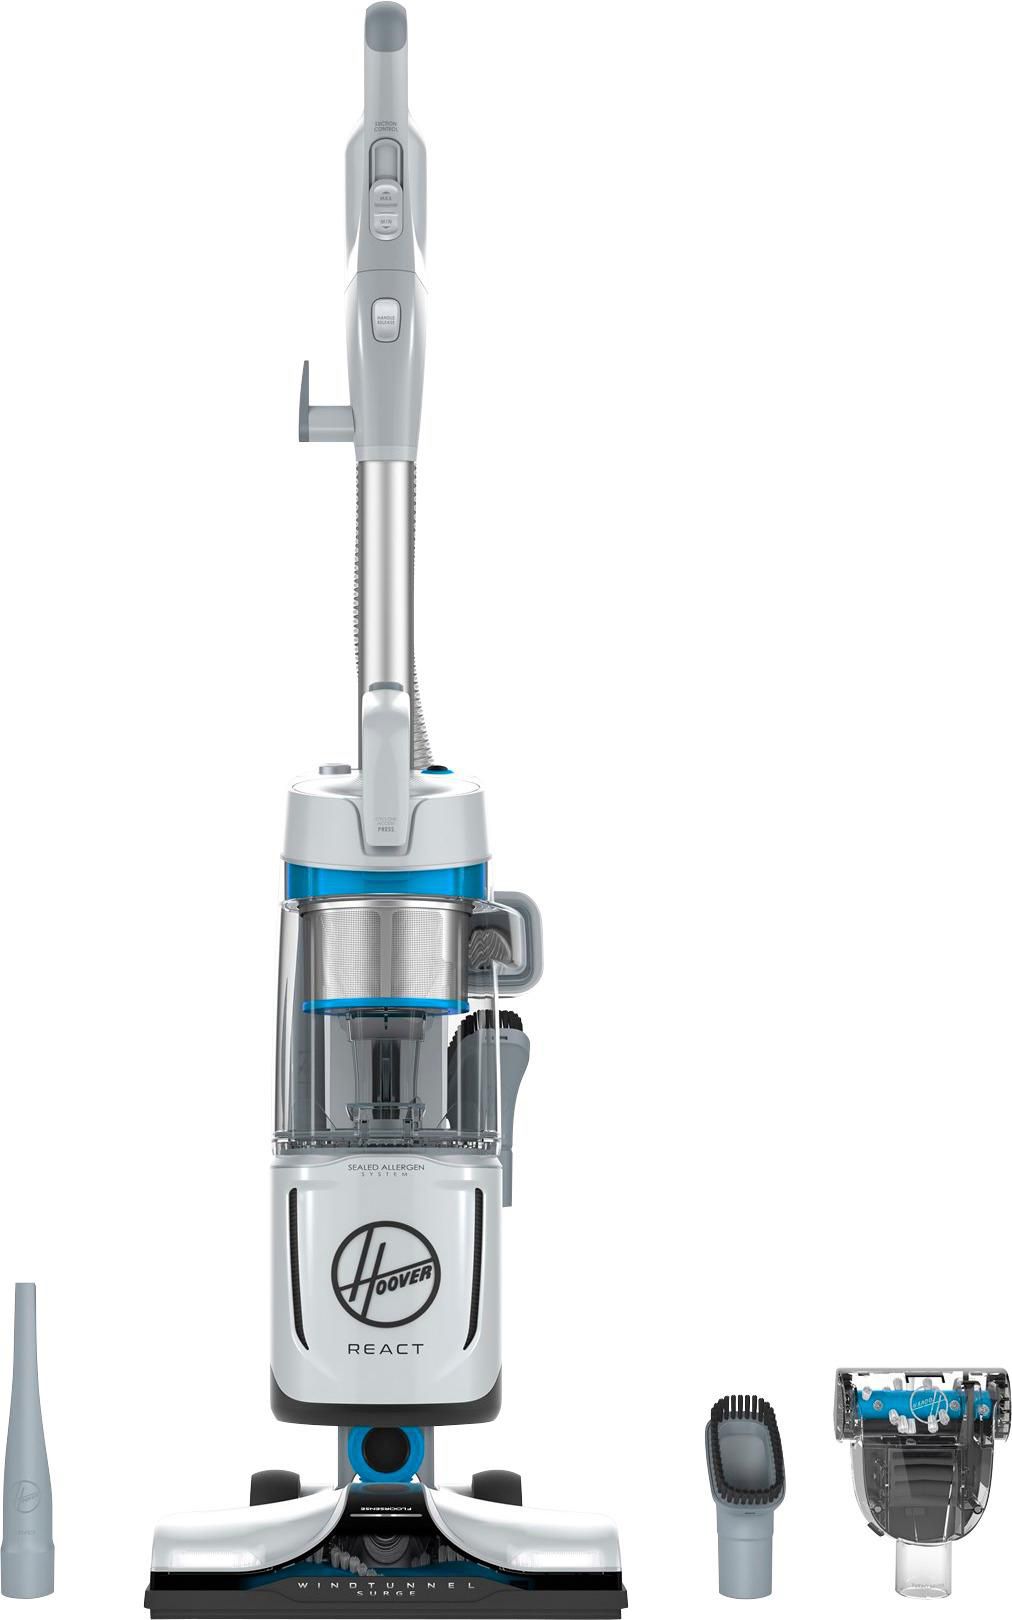 Discontinued Hoover REACT QuickLift Upright Vacuum Cleaner